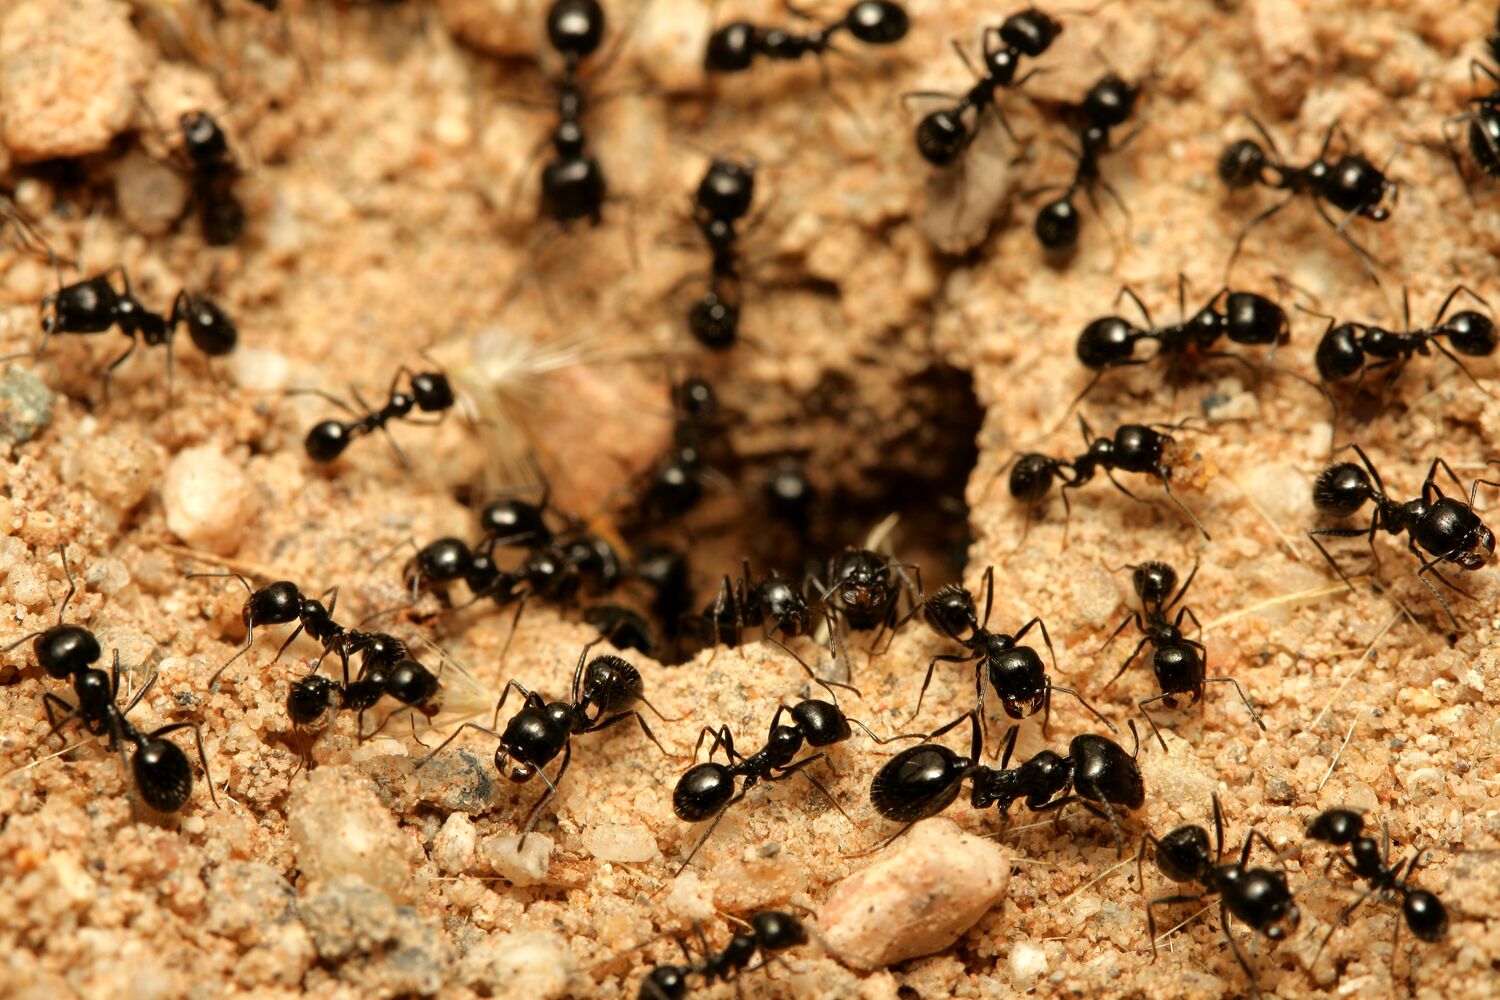 Large-Seezon - How to get rid of ants 3 - ant nest (1)